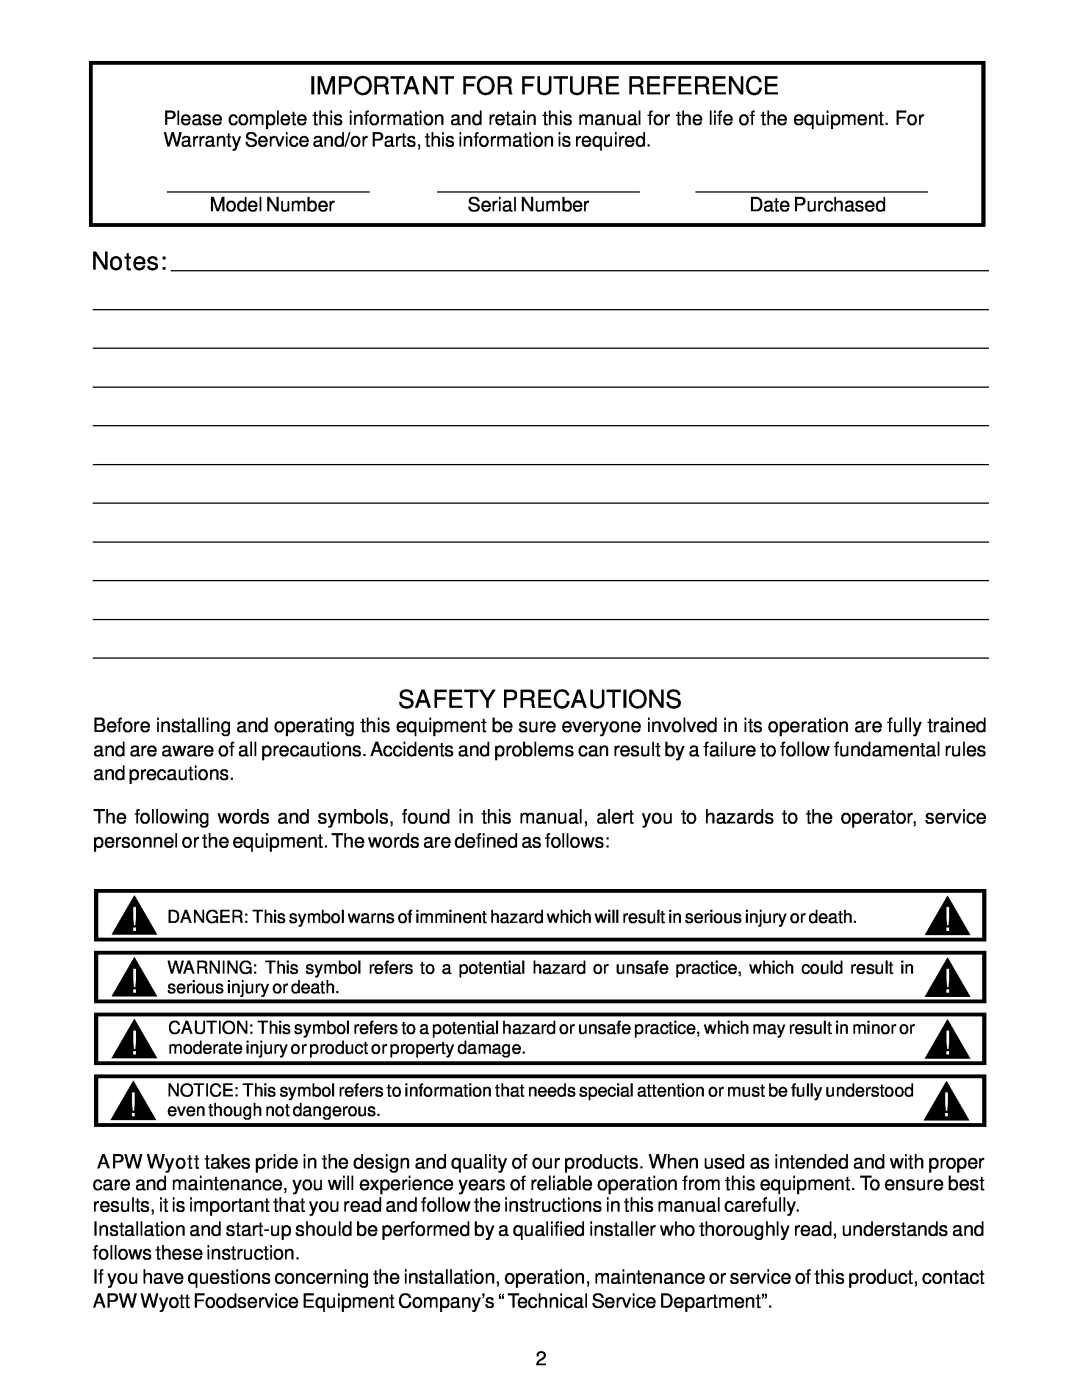 APW Wyott FT1000H operating instructions Important For Future Reference, Notes SAFETY PRECAUTIONS 